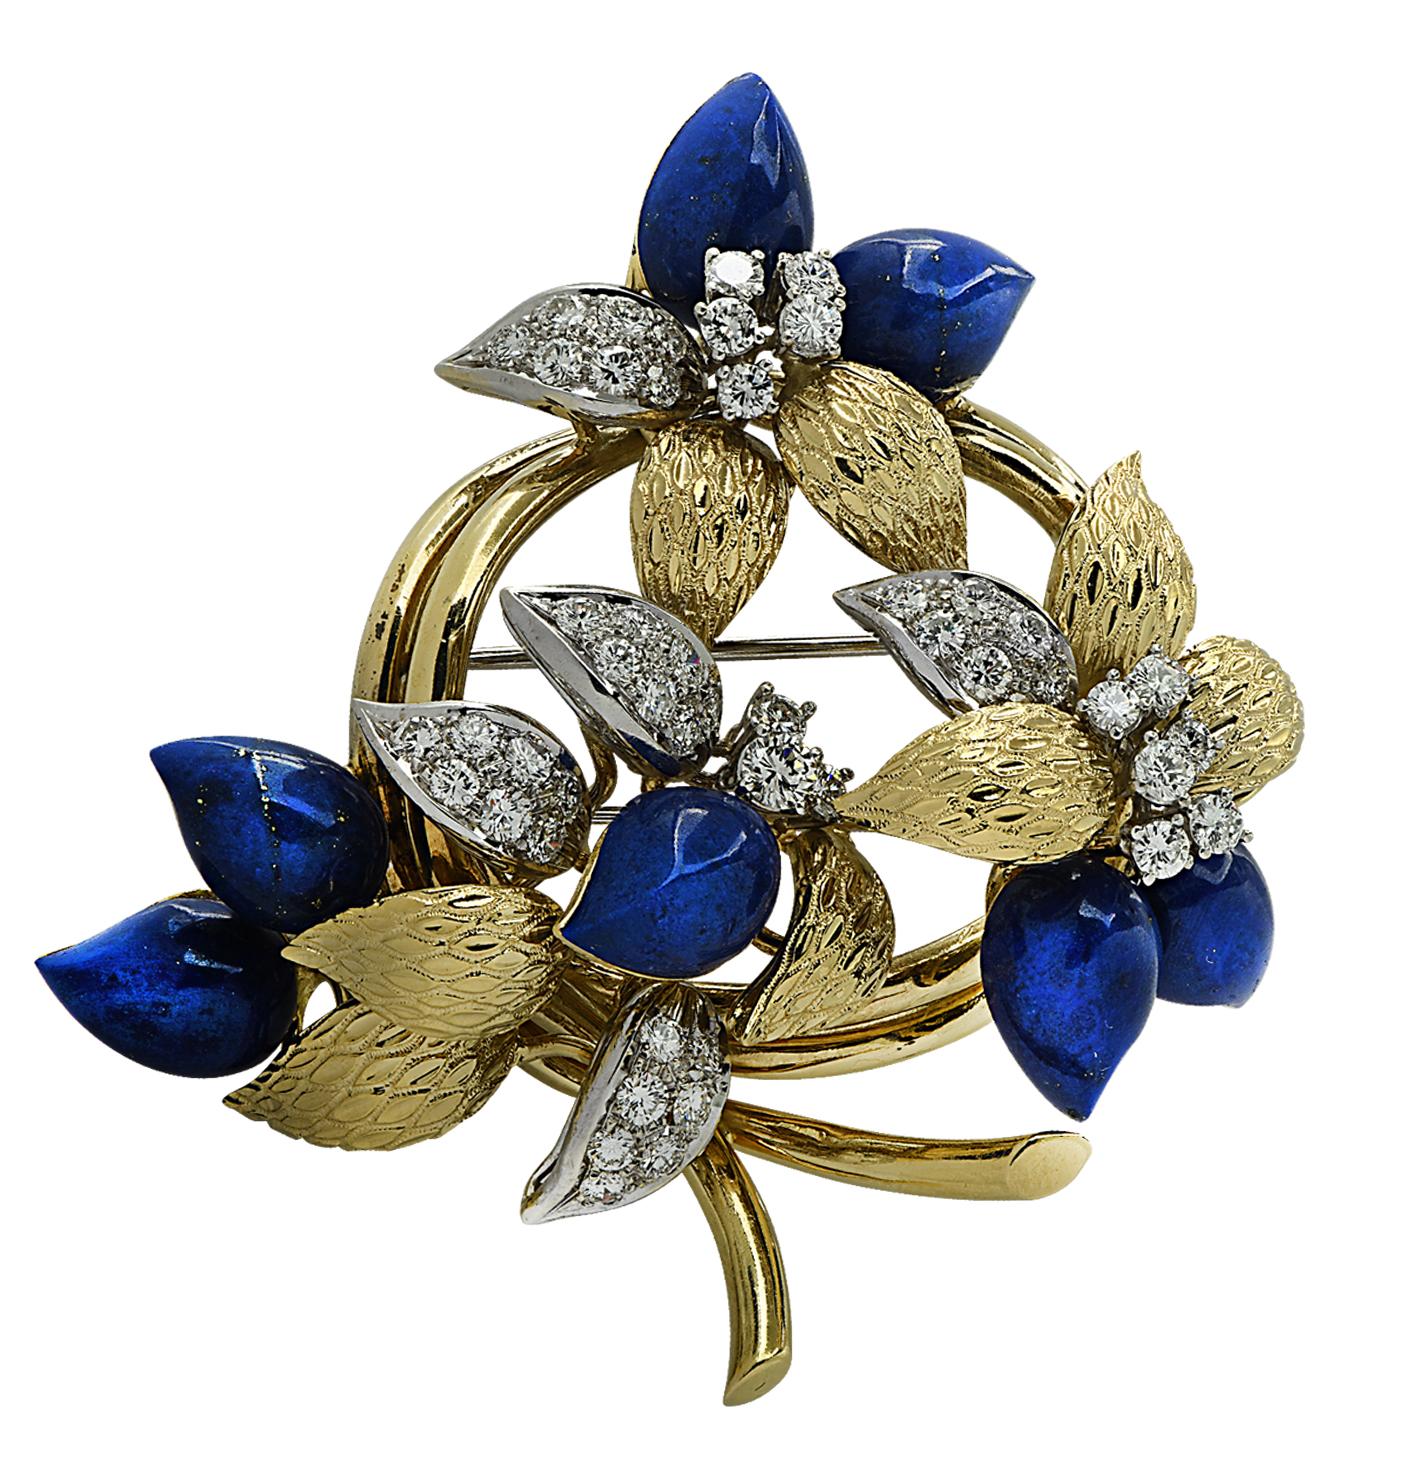 Tiffany & Co. Brooch Pin crafted in 18 karat yellow and white gold featuring 49 round brilliant cut diamonds weighing approximately 3.51 carats total F-G color, VS clarity, and 7 petal shaped Lapis Lazuli cabochons. The diamonds and lapis are